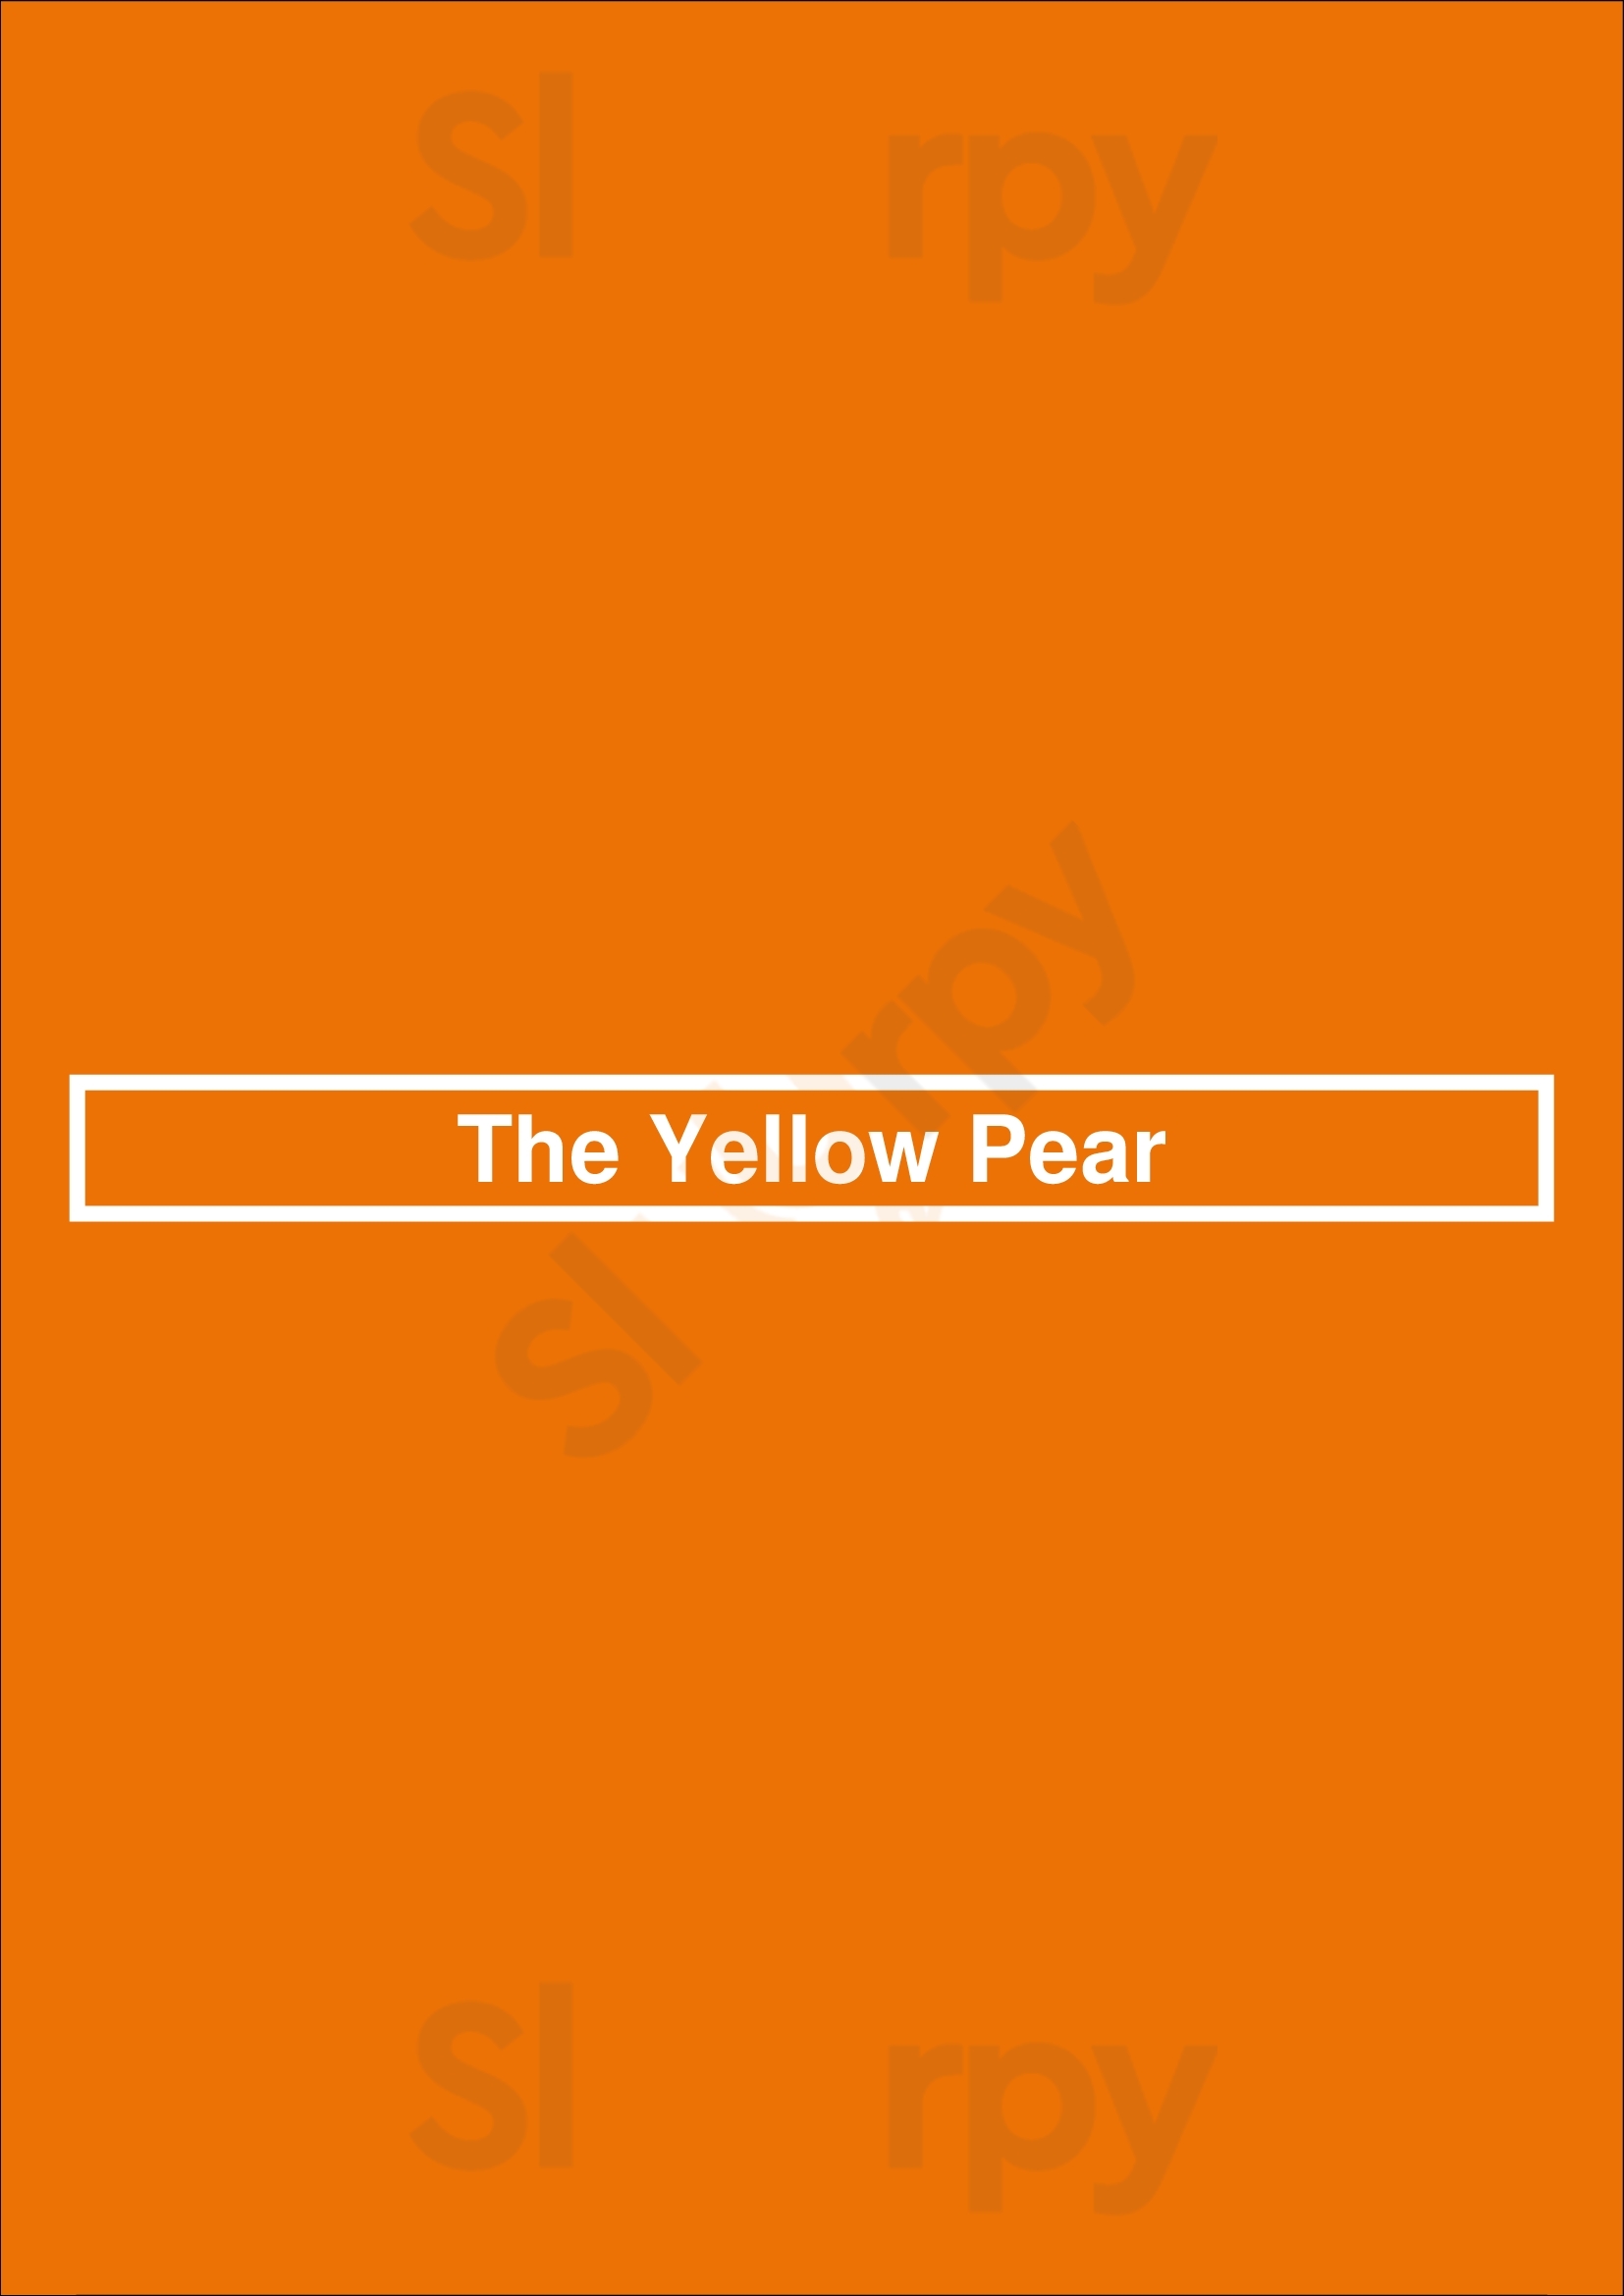 The Yellow Pear St. Catharines Menu - 1